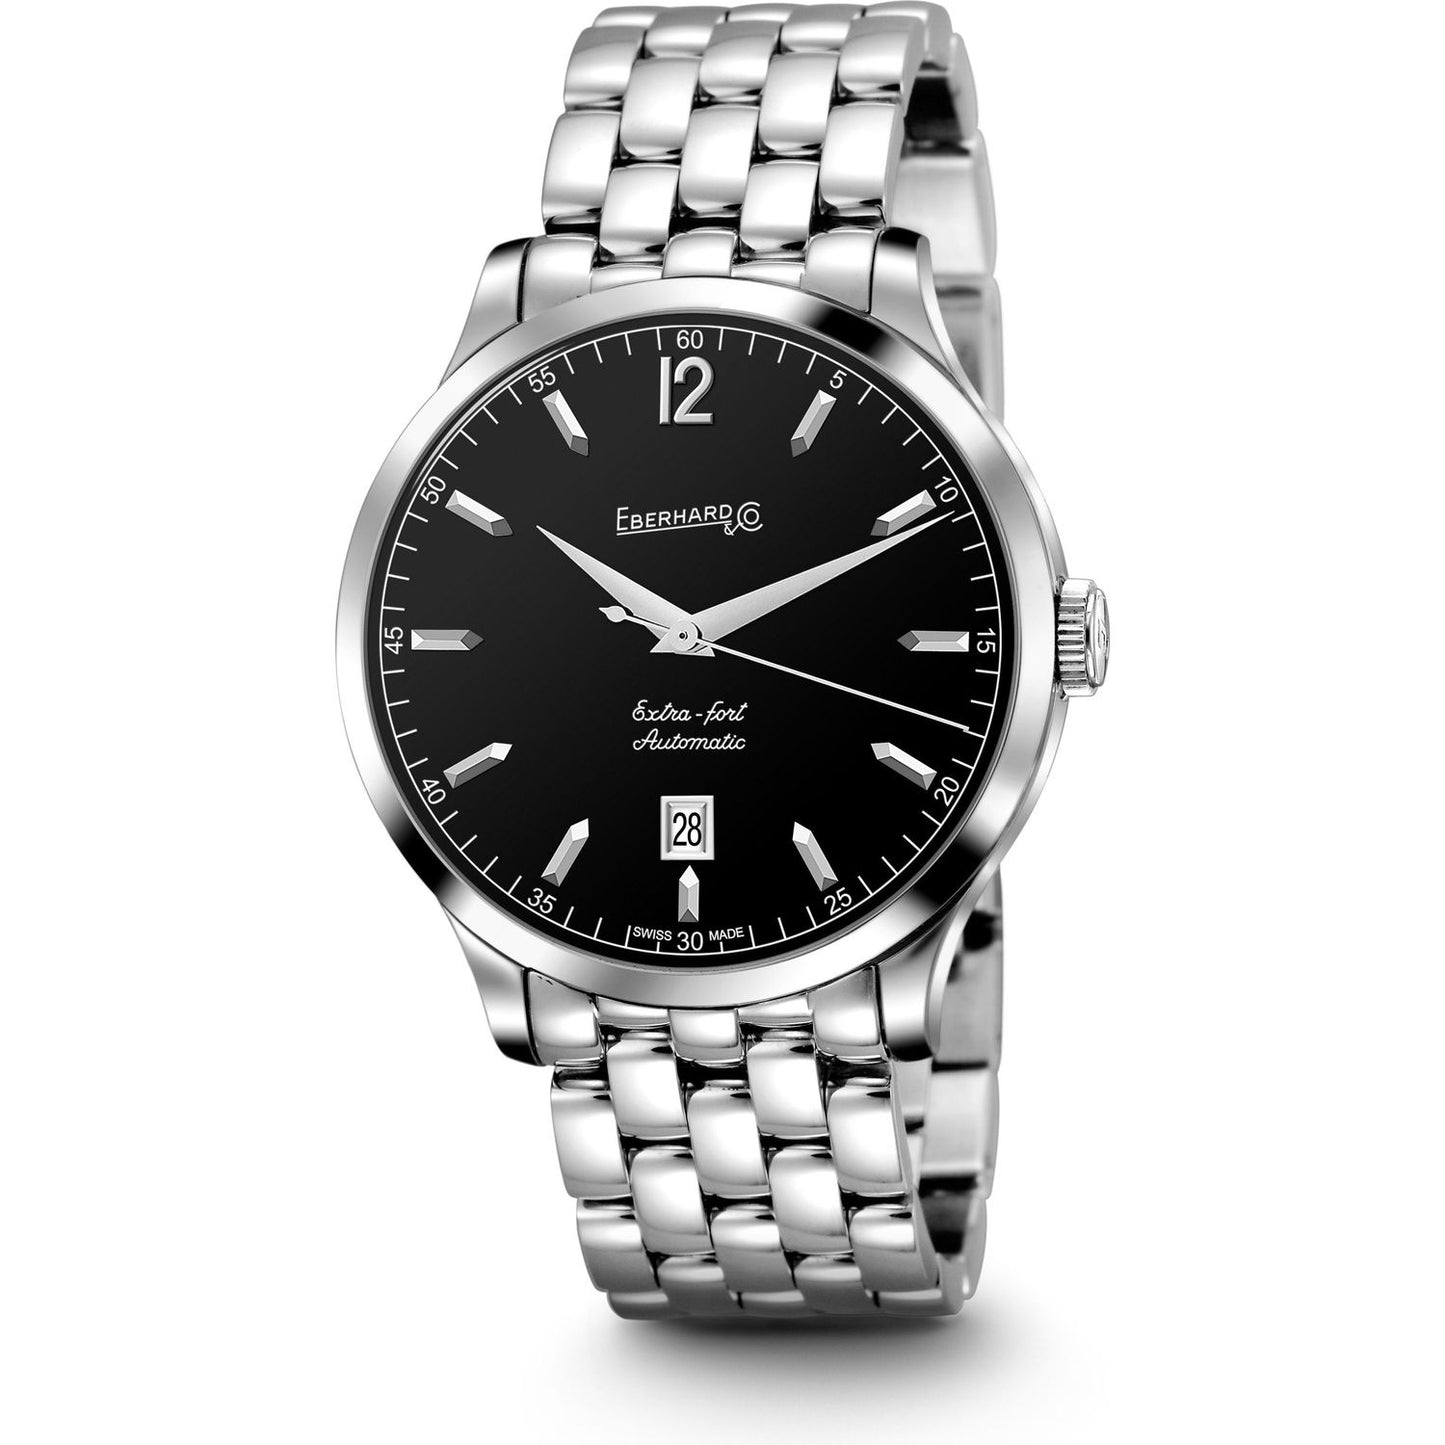 EBERHARD EBERHARD Mod. EXTRA-FORT eberhard-mod-extra-fort-1 WATCHES